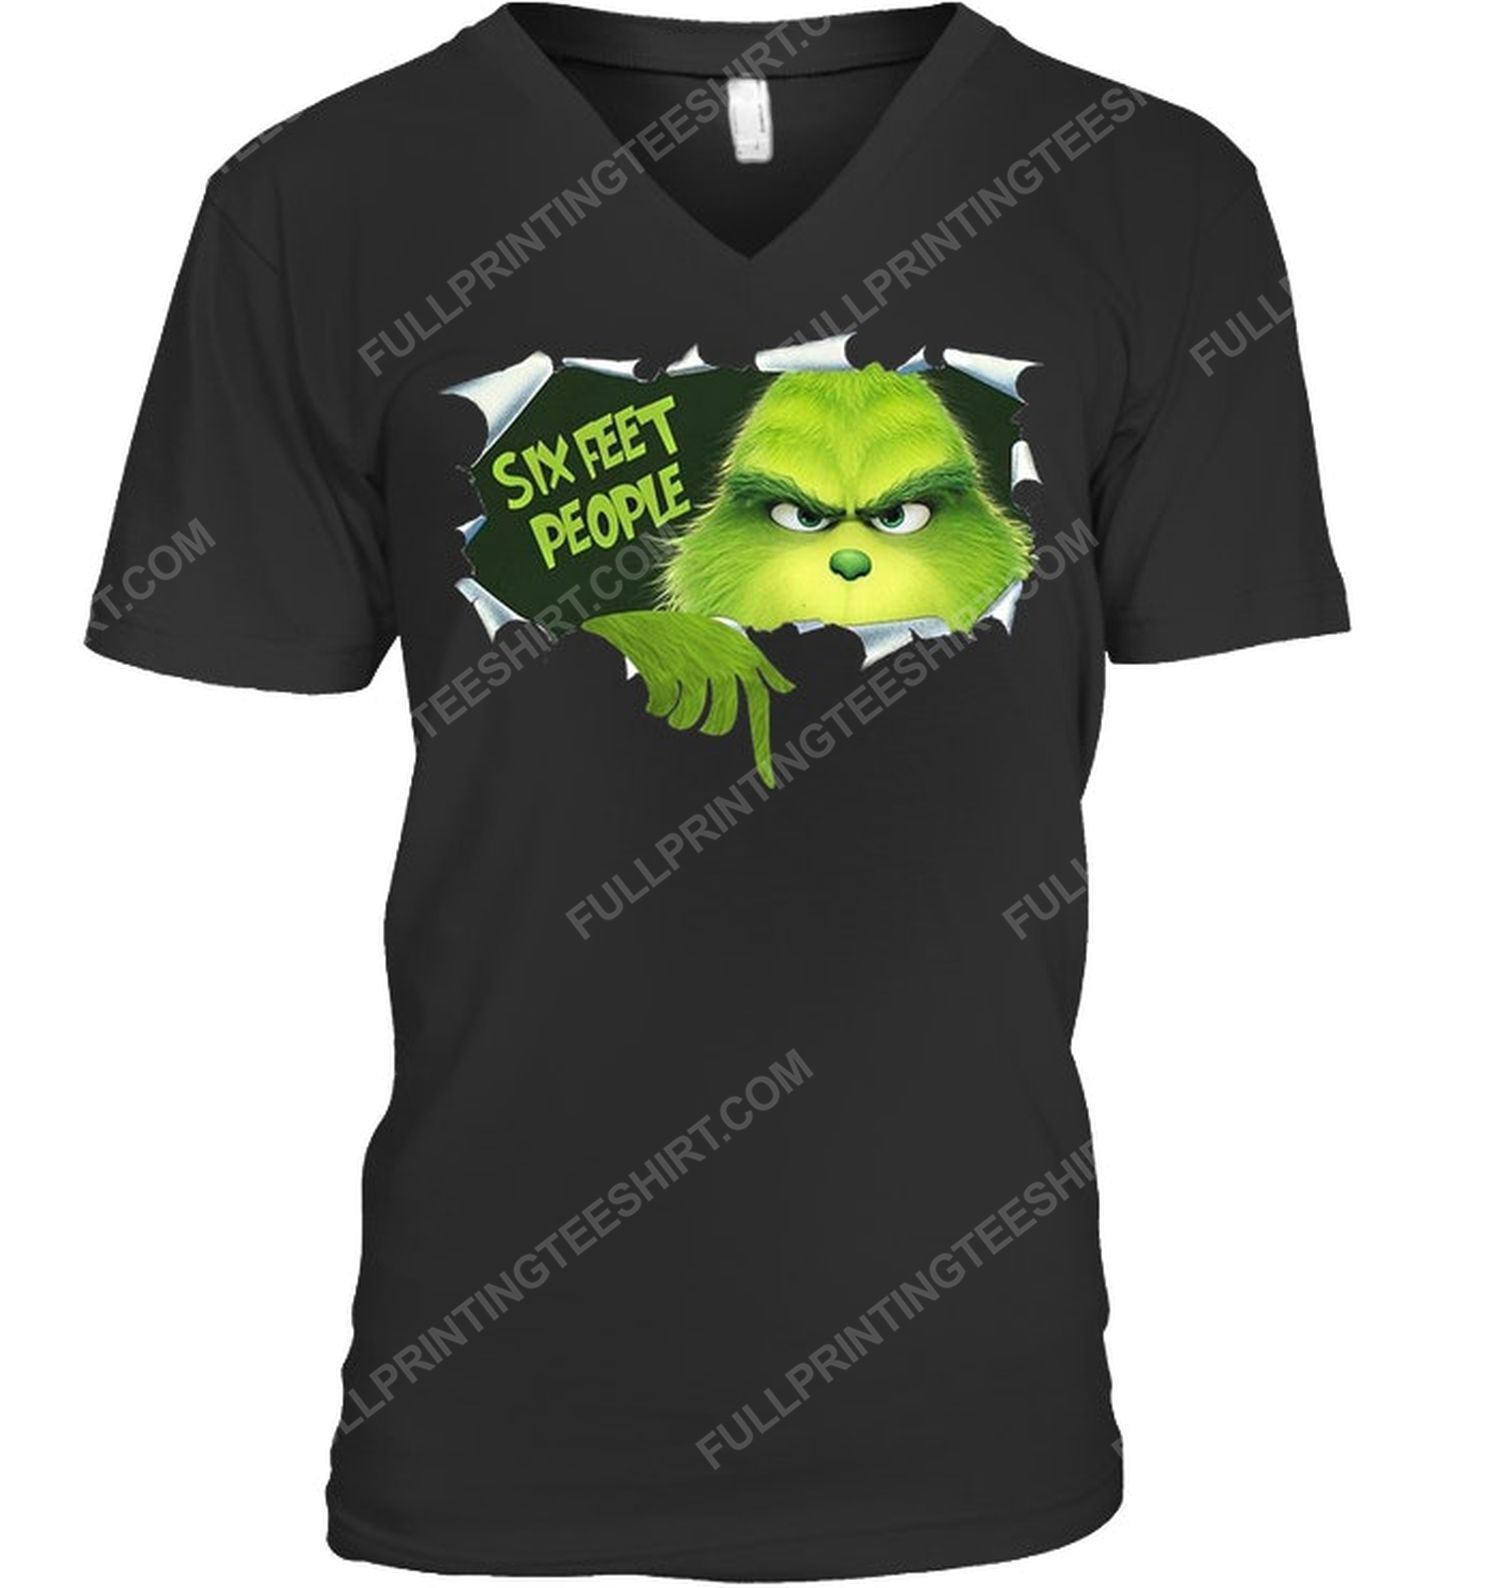 The grinch six feet people social distancing v-neck